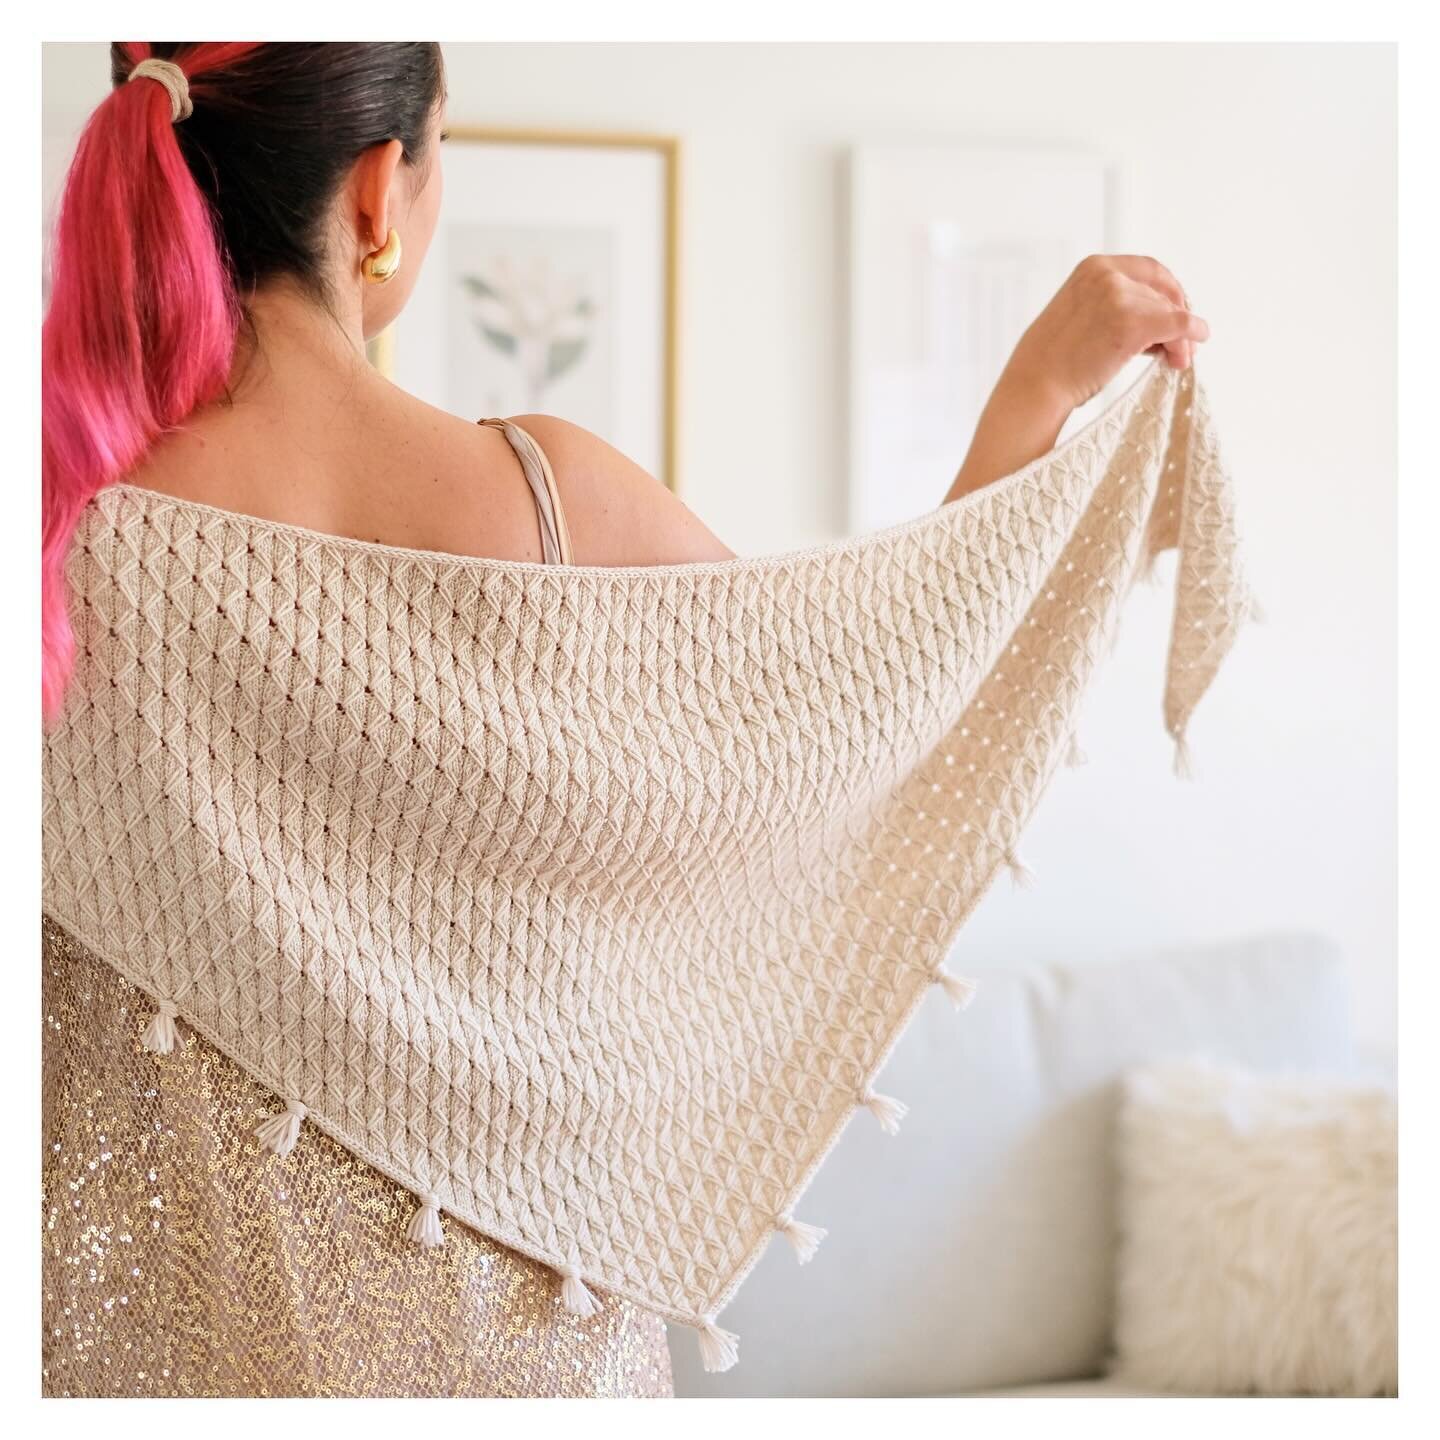 Thank you for all the love you&rsquo;re showing to Star Jasmine Shawl!
I adore this simple and effective design, and seeing it received so well fills my heart 💛

As the first ever @bayareayarncrawl is rolling in full force, I can&rsquo;t wait to mee